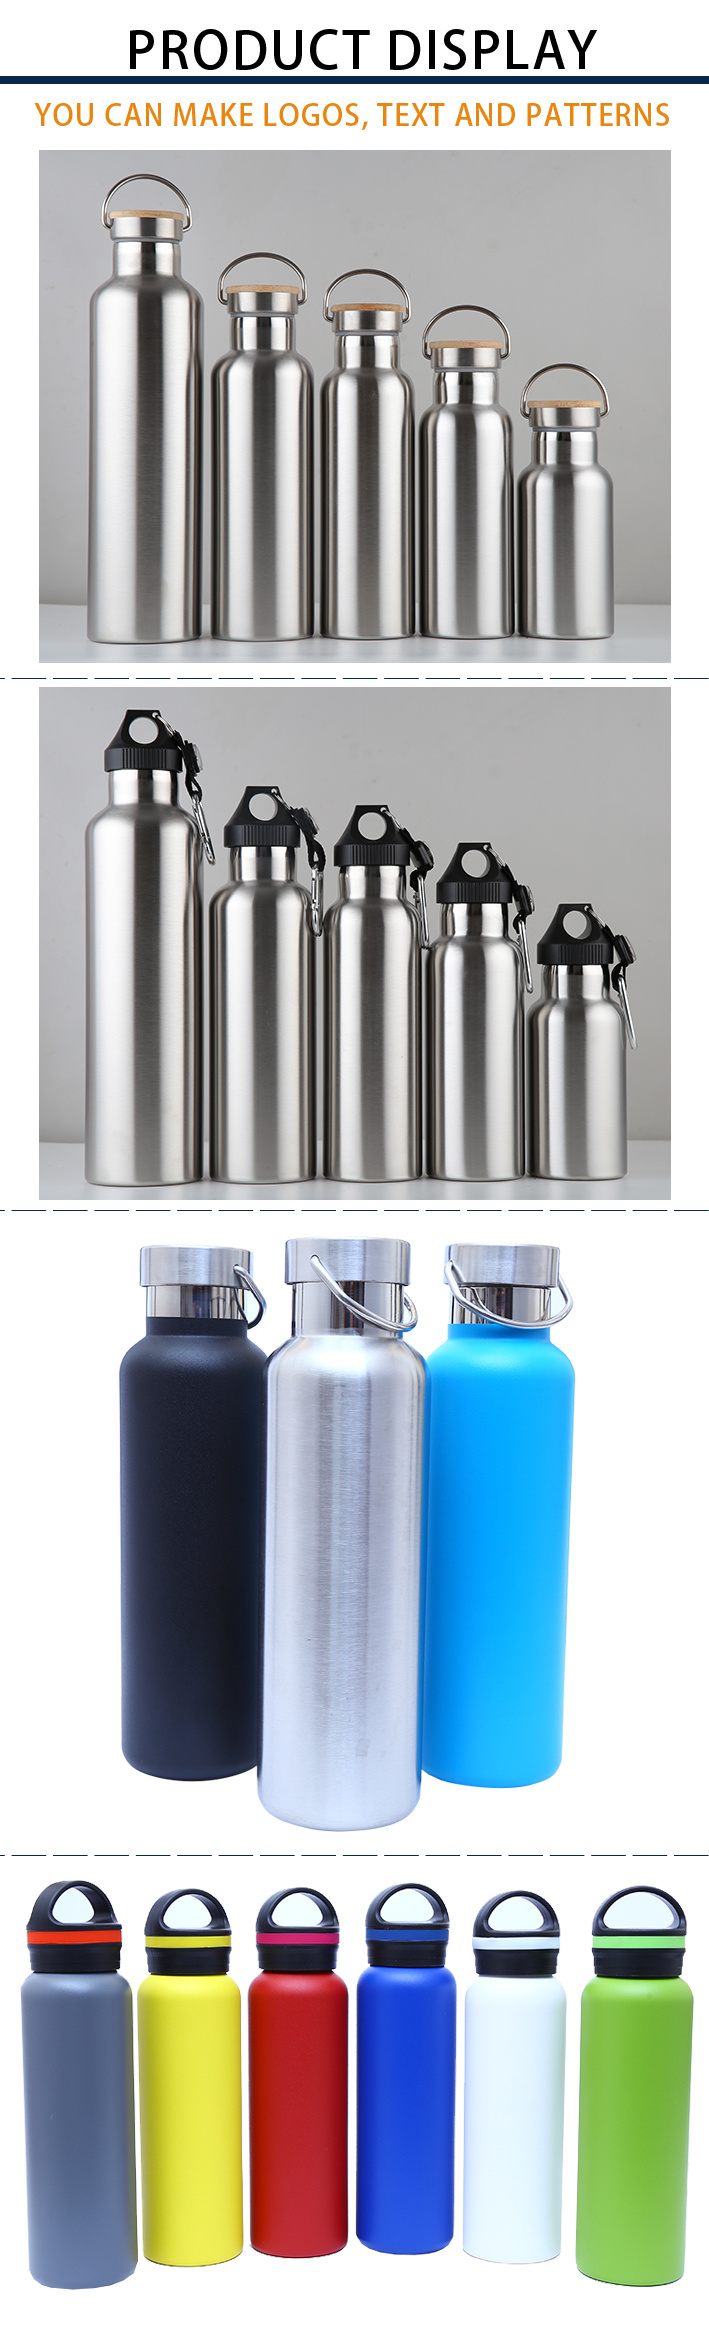 64oz Double Wall Water Bottle Insulated Stainless Steel Tumbler Drinking Cup Vacuum Flasks